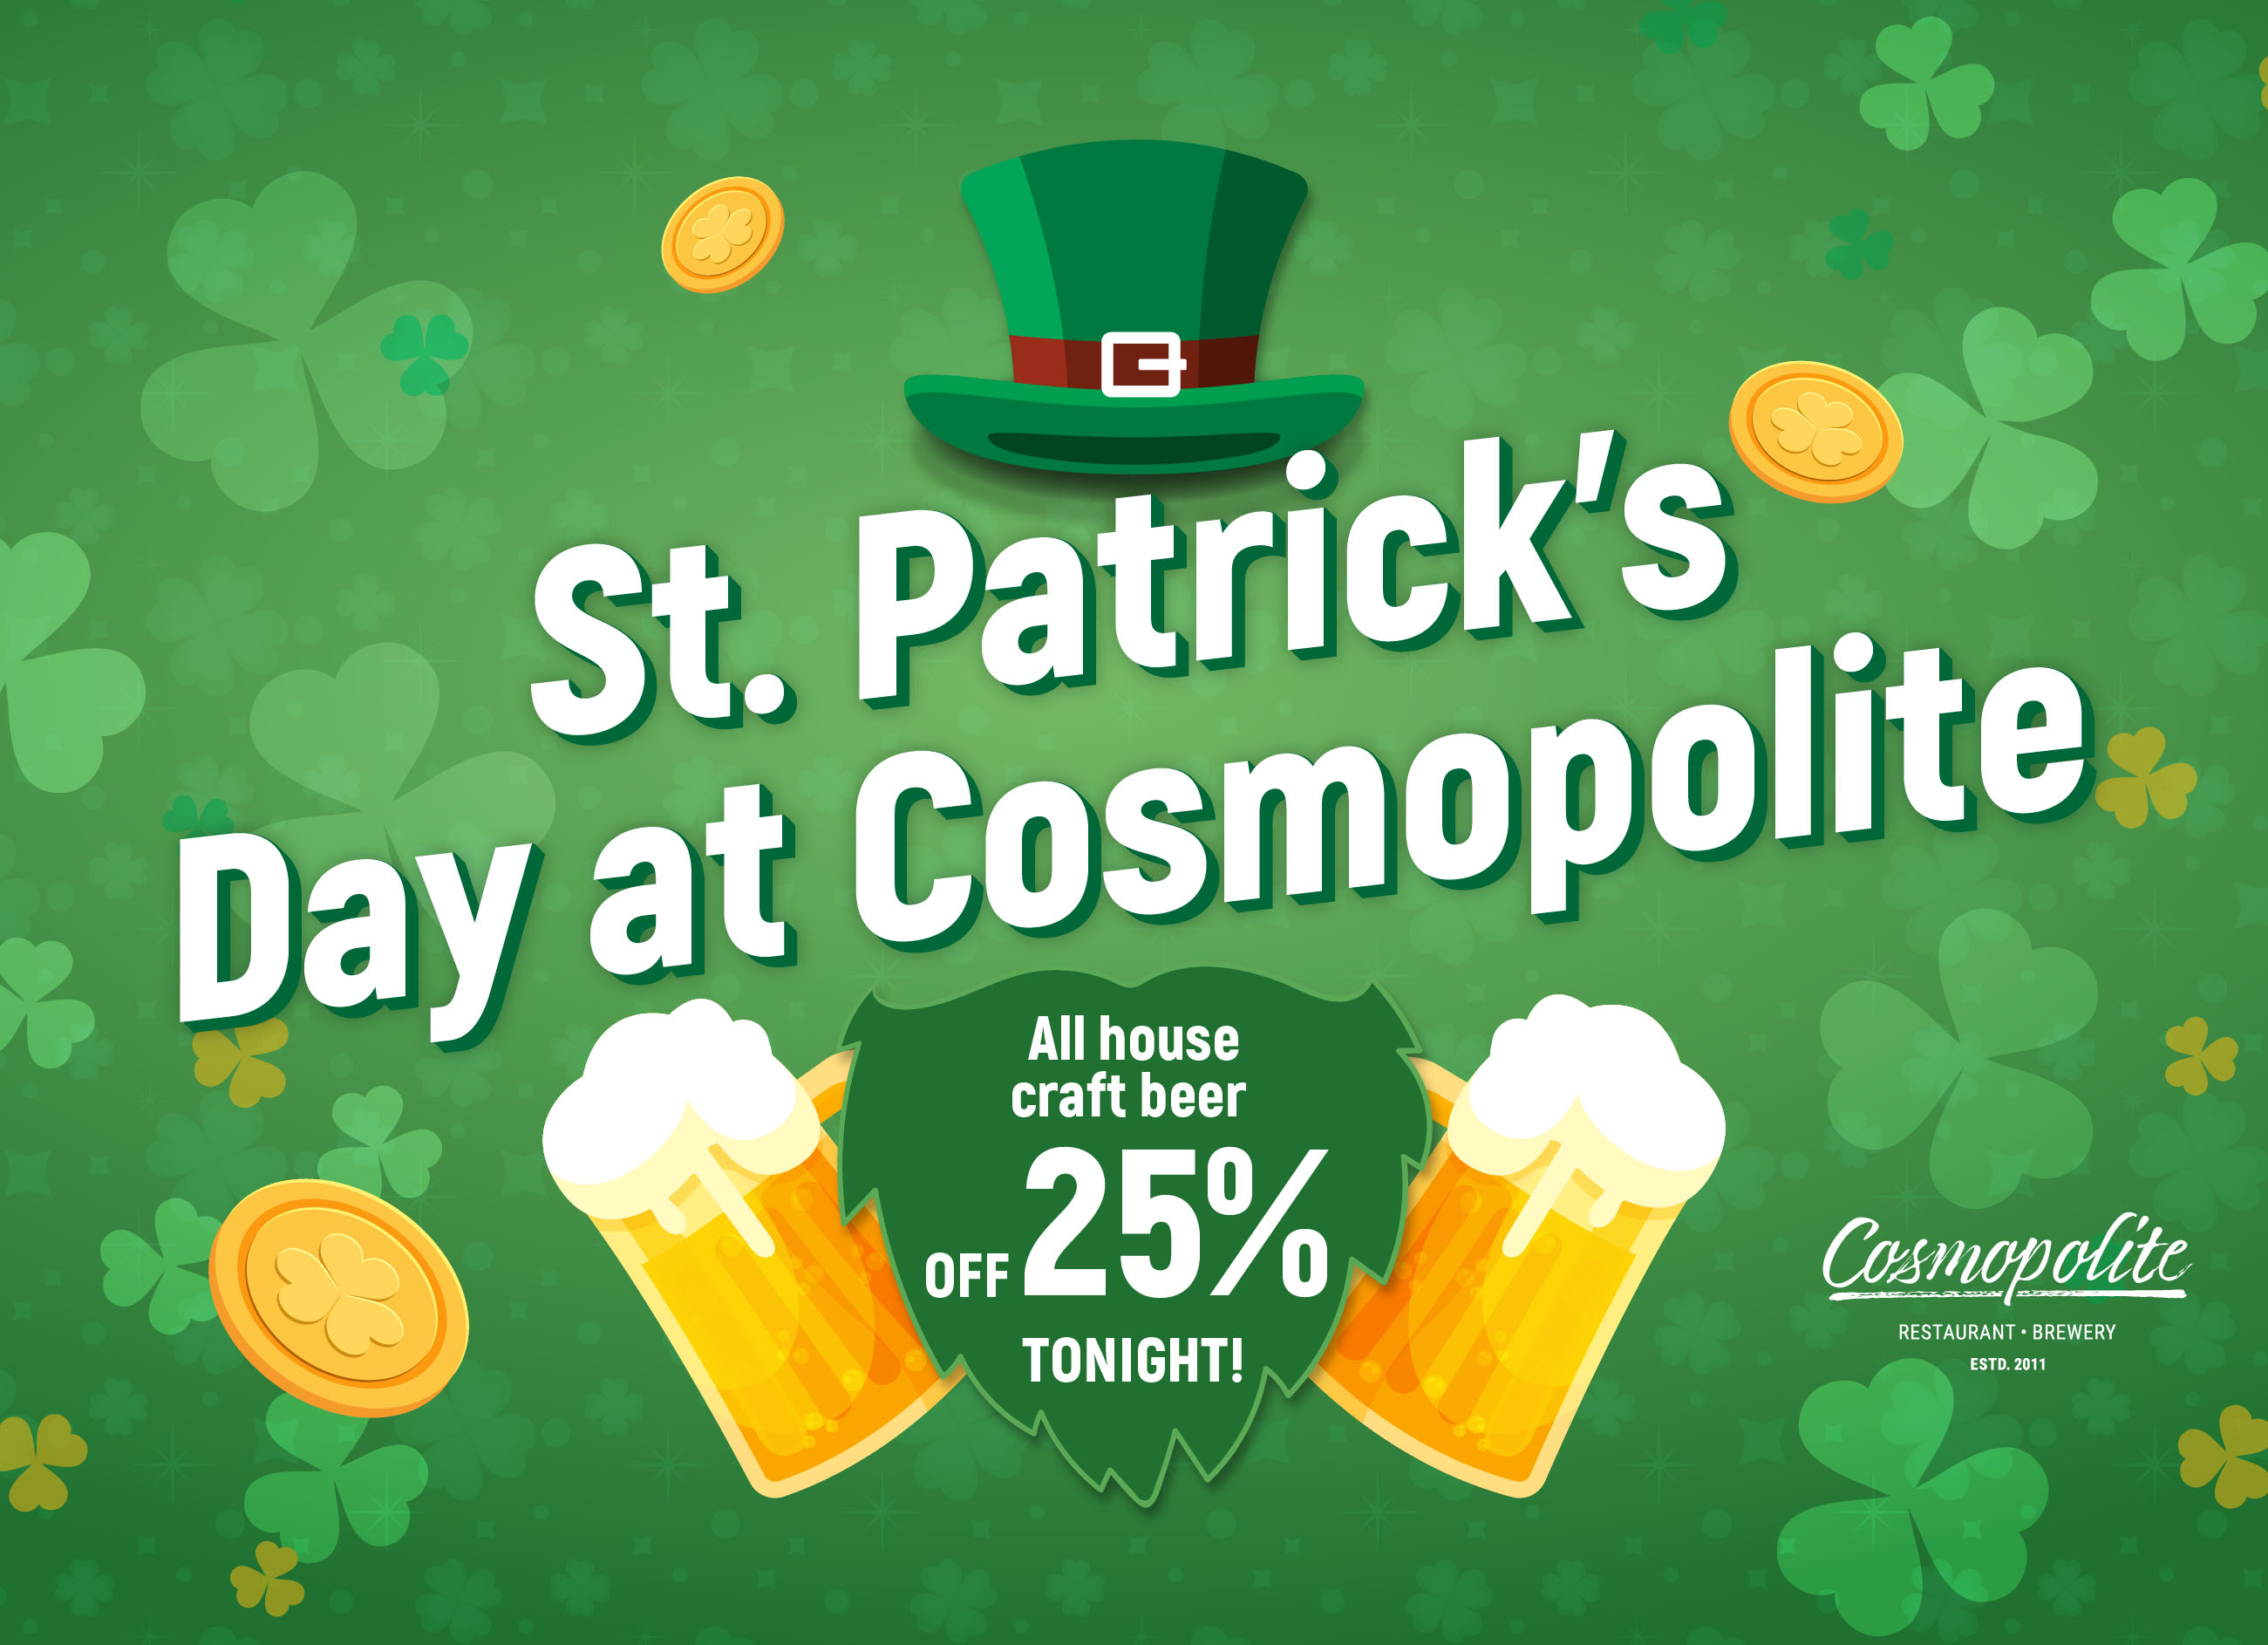 St. Patrick's Day tonight at Cosmopolite! Welcome! 